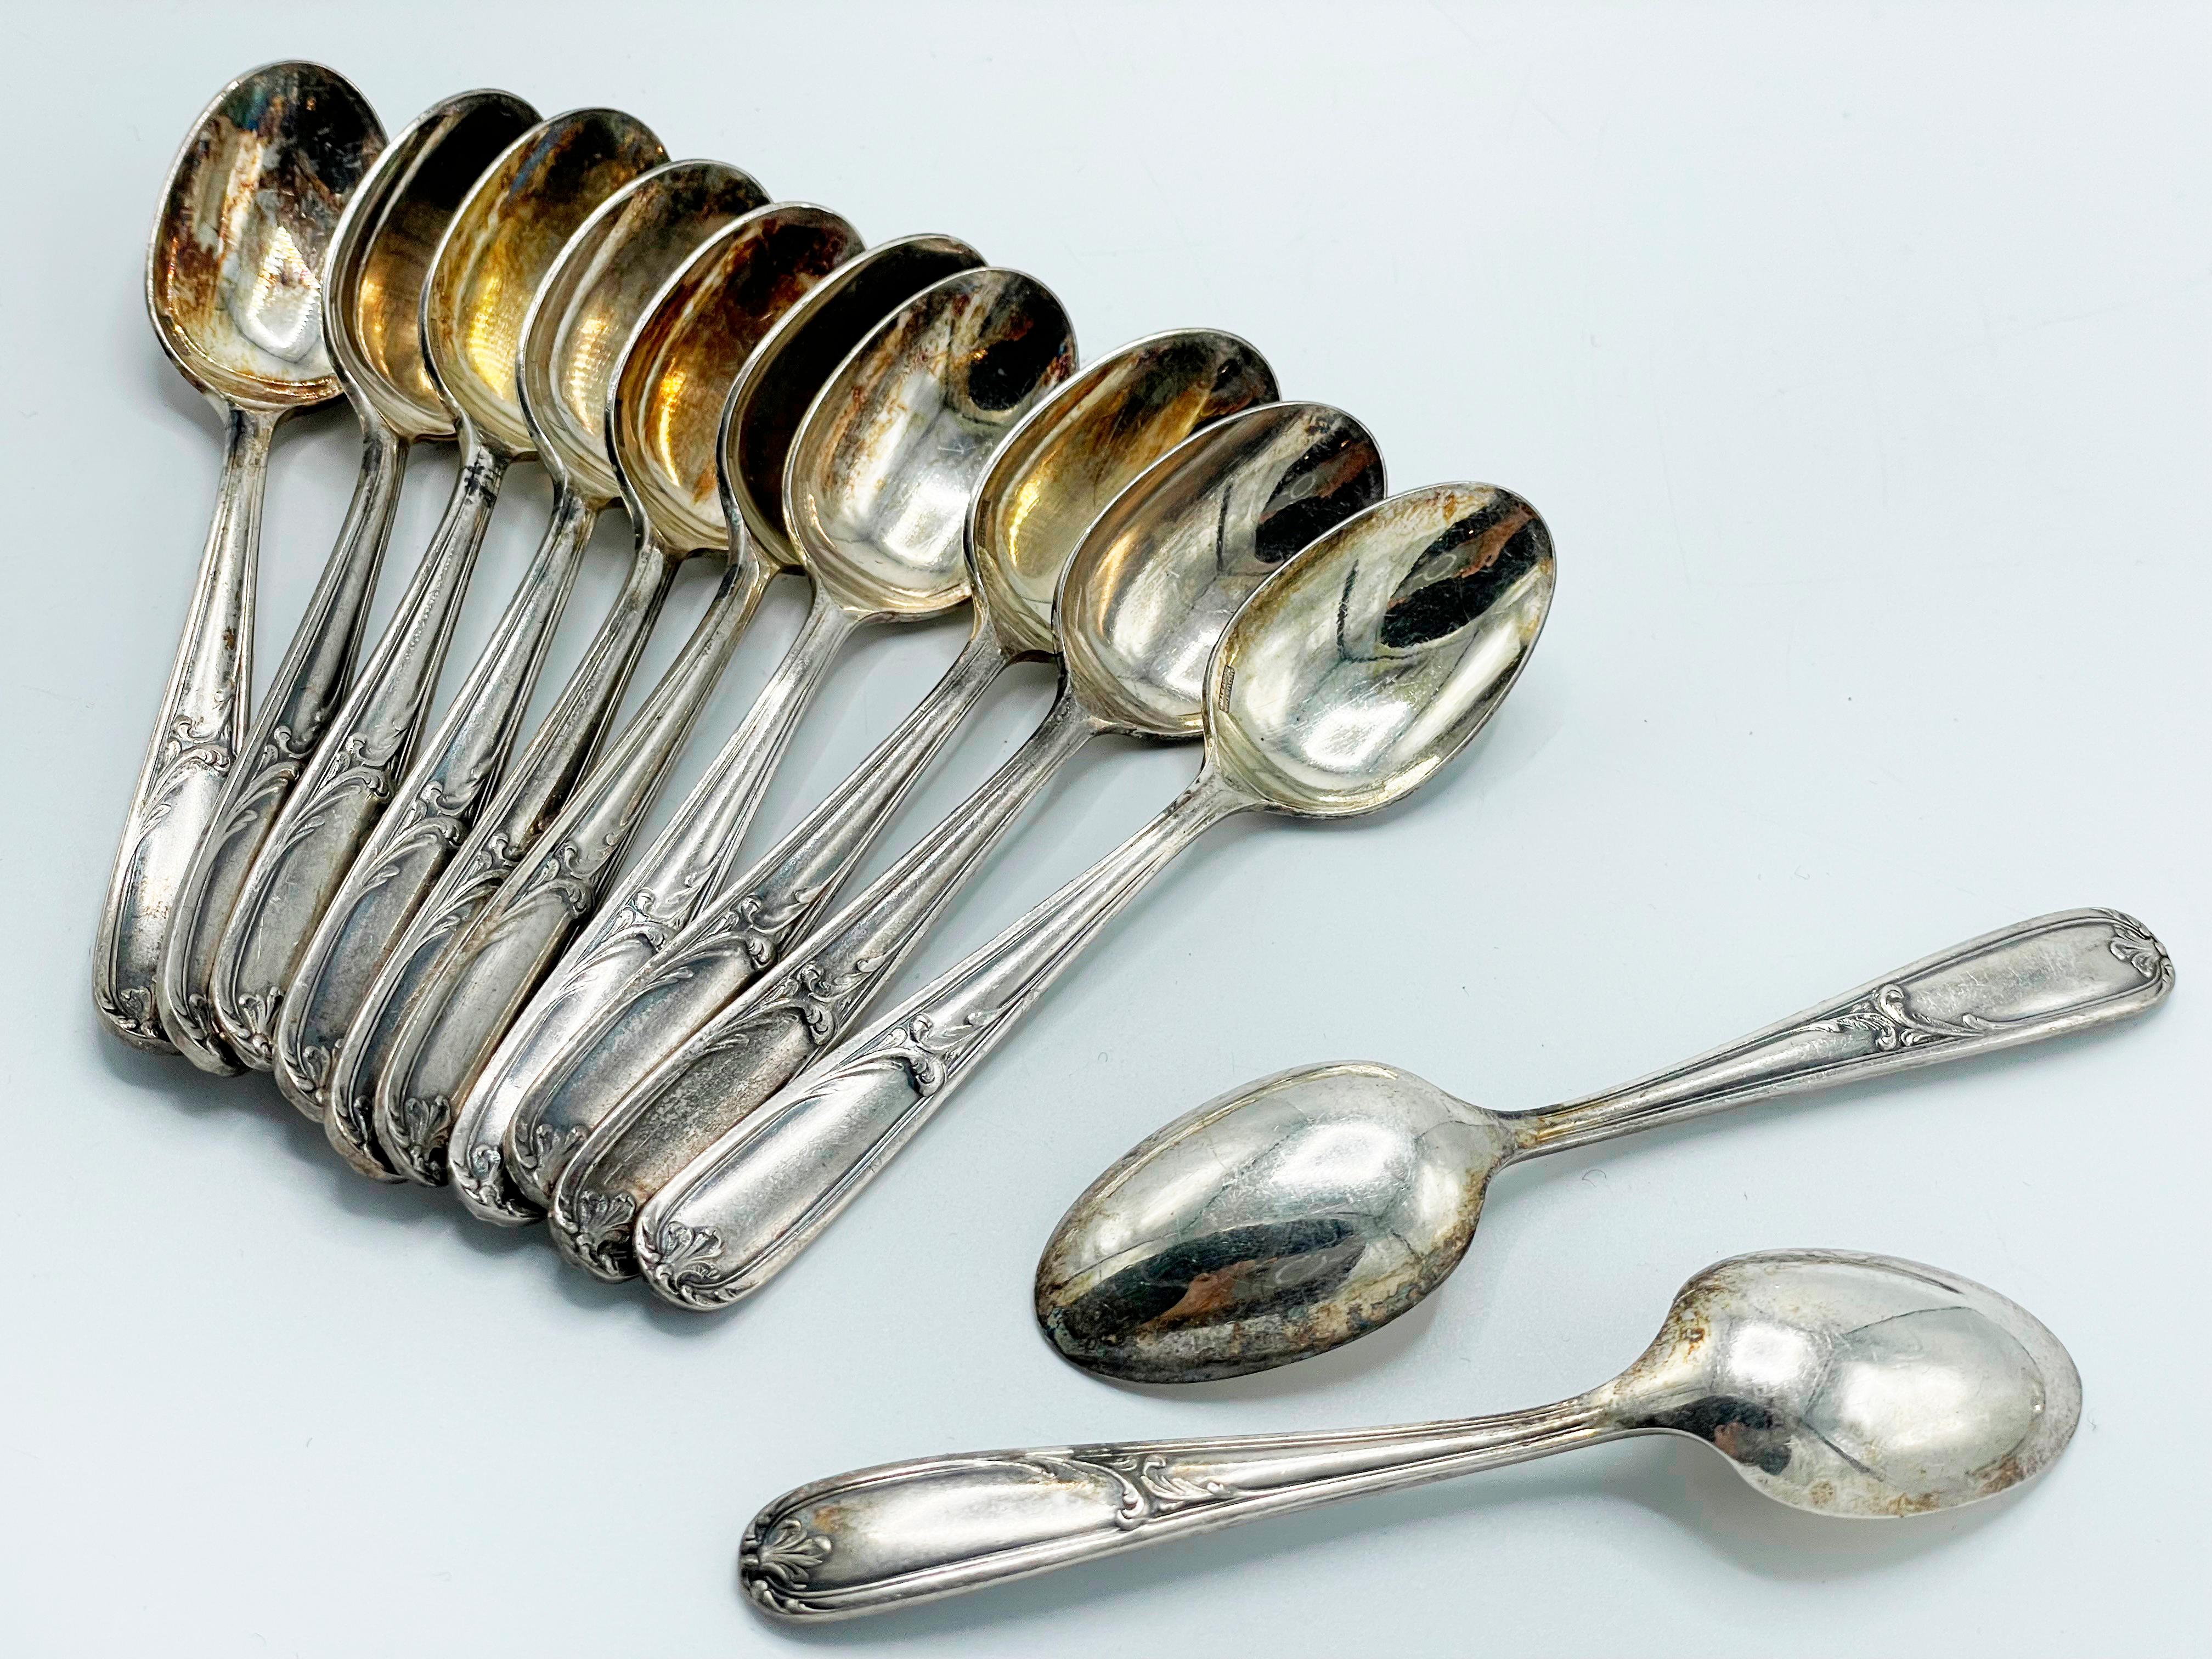 Silver Plate Christofle Made in Argentina, Flatware art nouveau in Silverplated